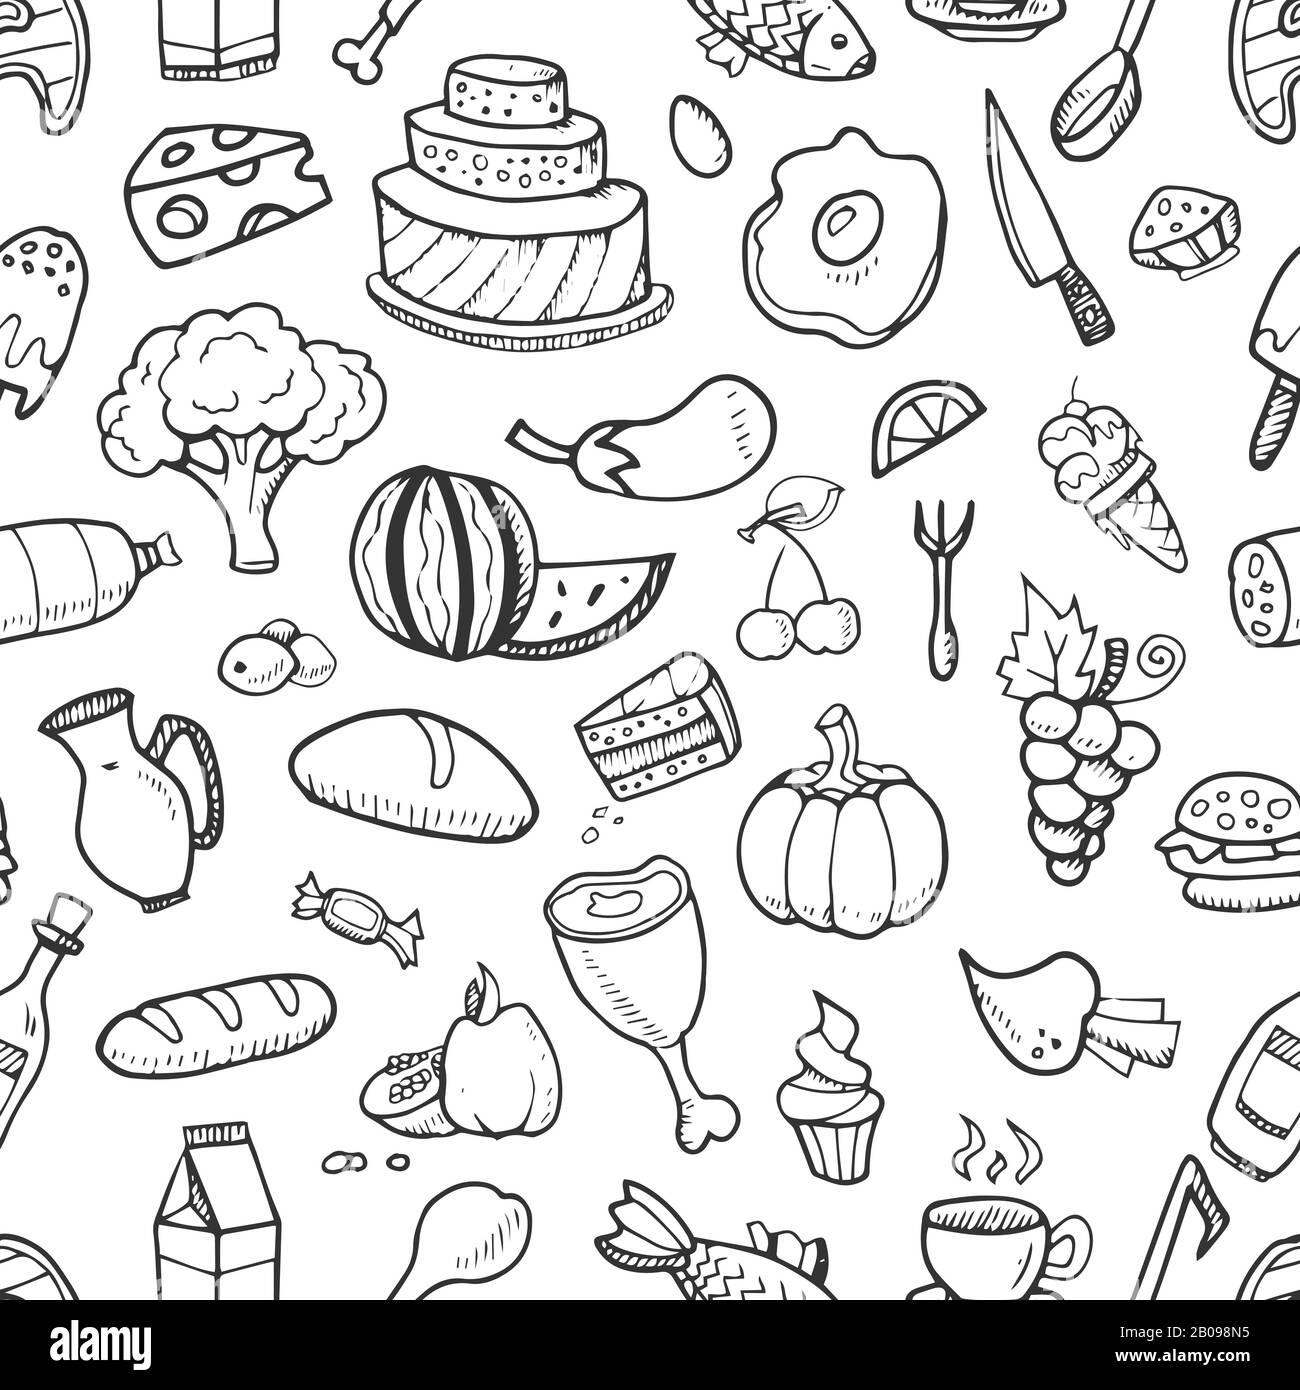 Doodle food ingredients, drinks and vegetables seamless pattern for menu design. Sketch background with food, vector drawing food illustration Stock Vector